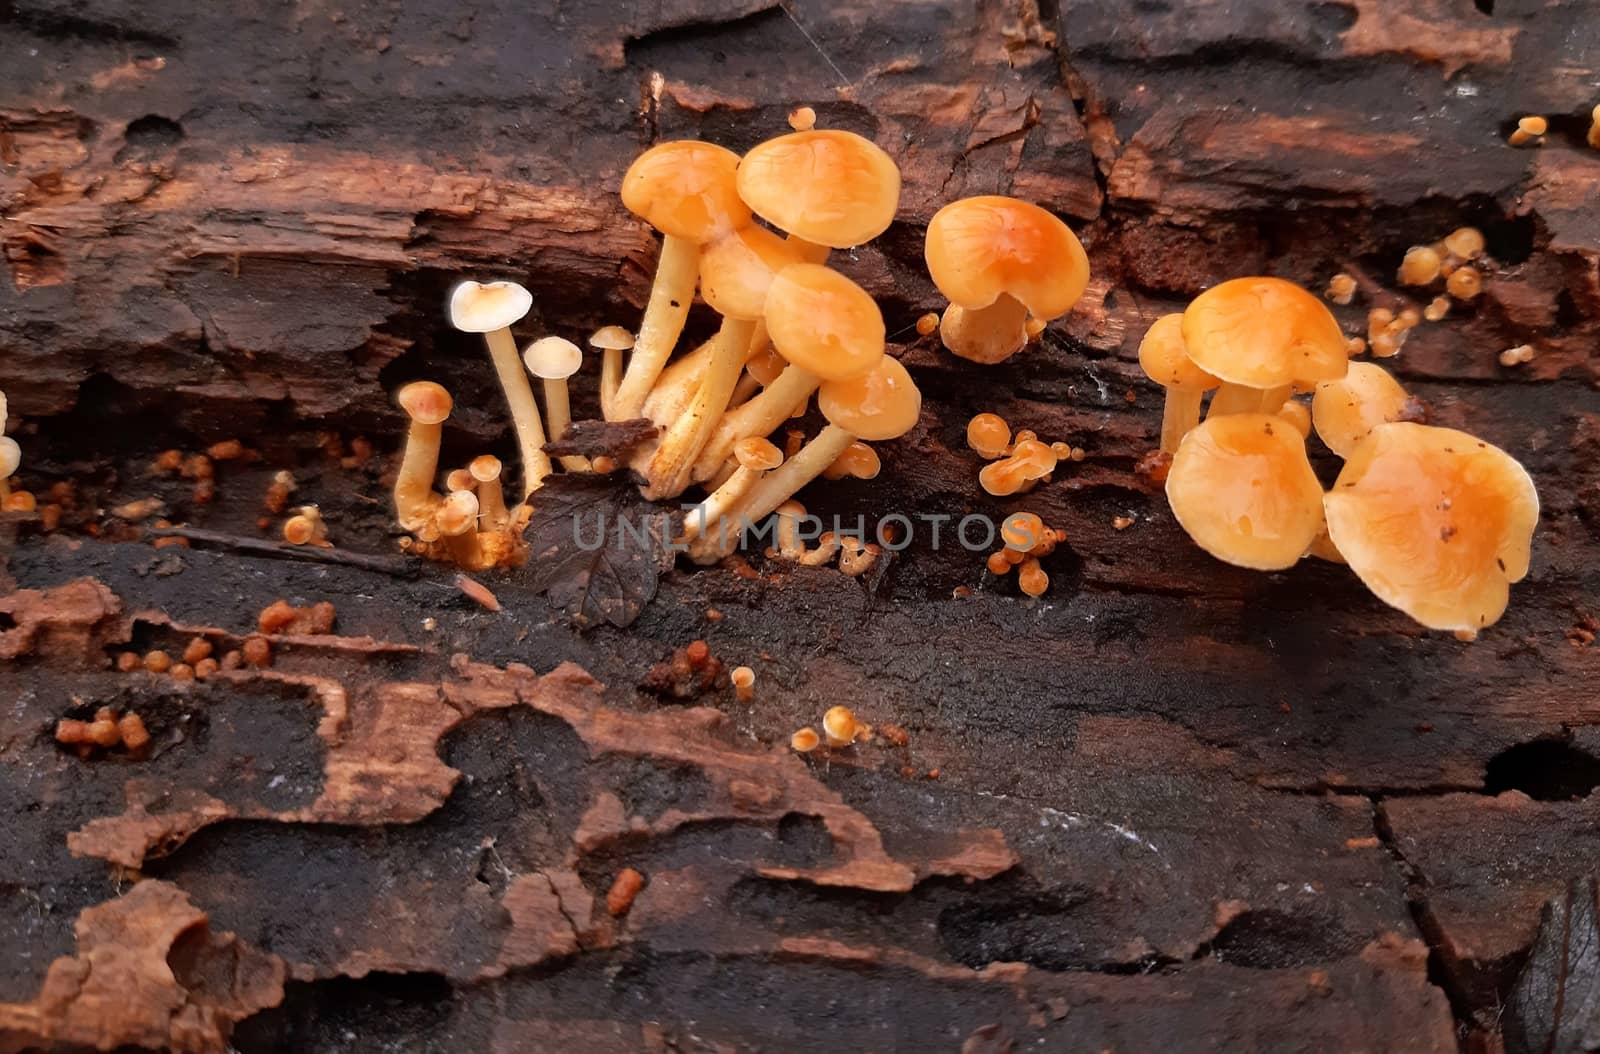 Yellow mushrooms grow in a rotten wood.